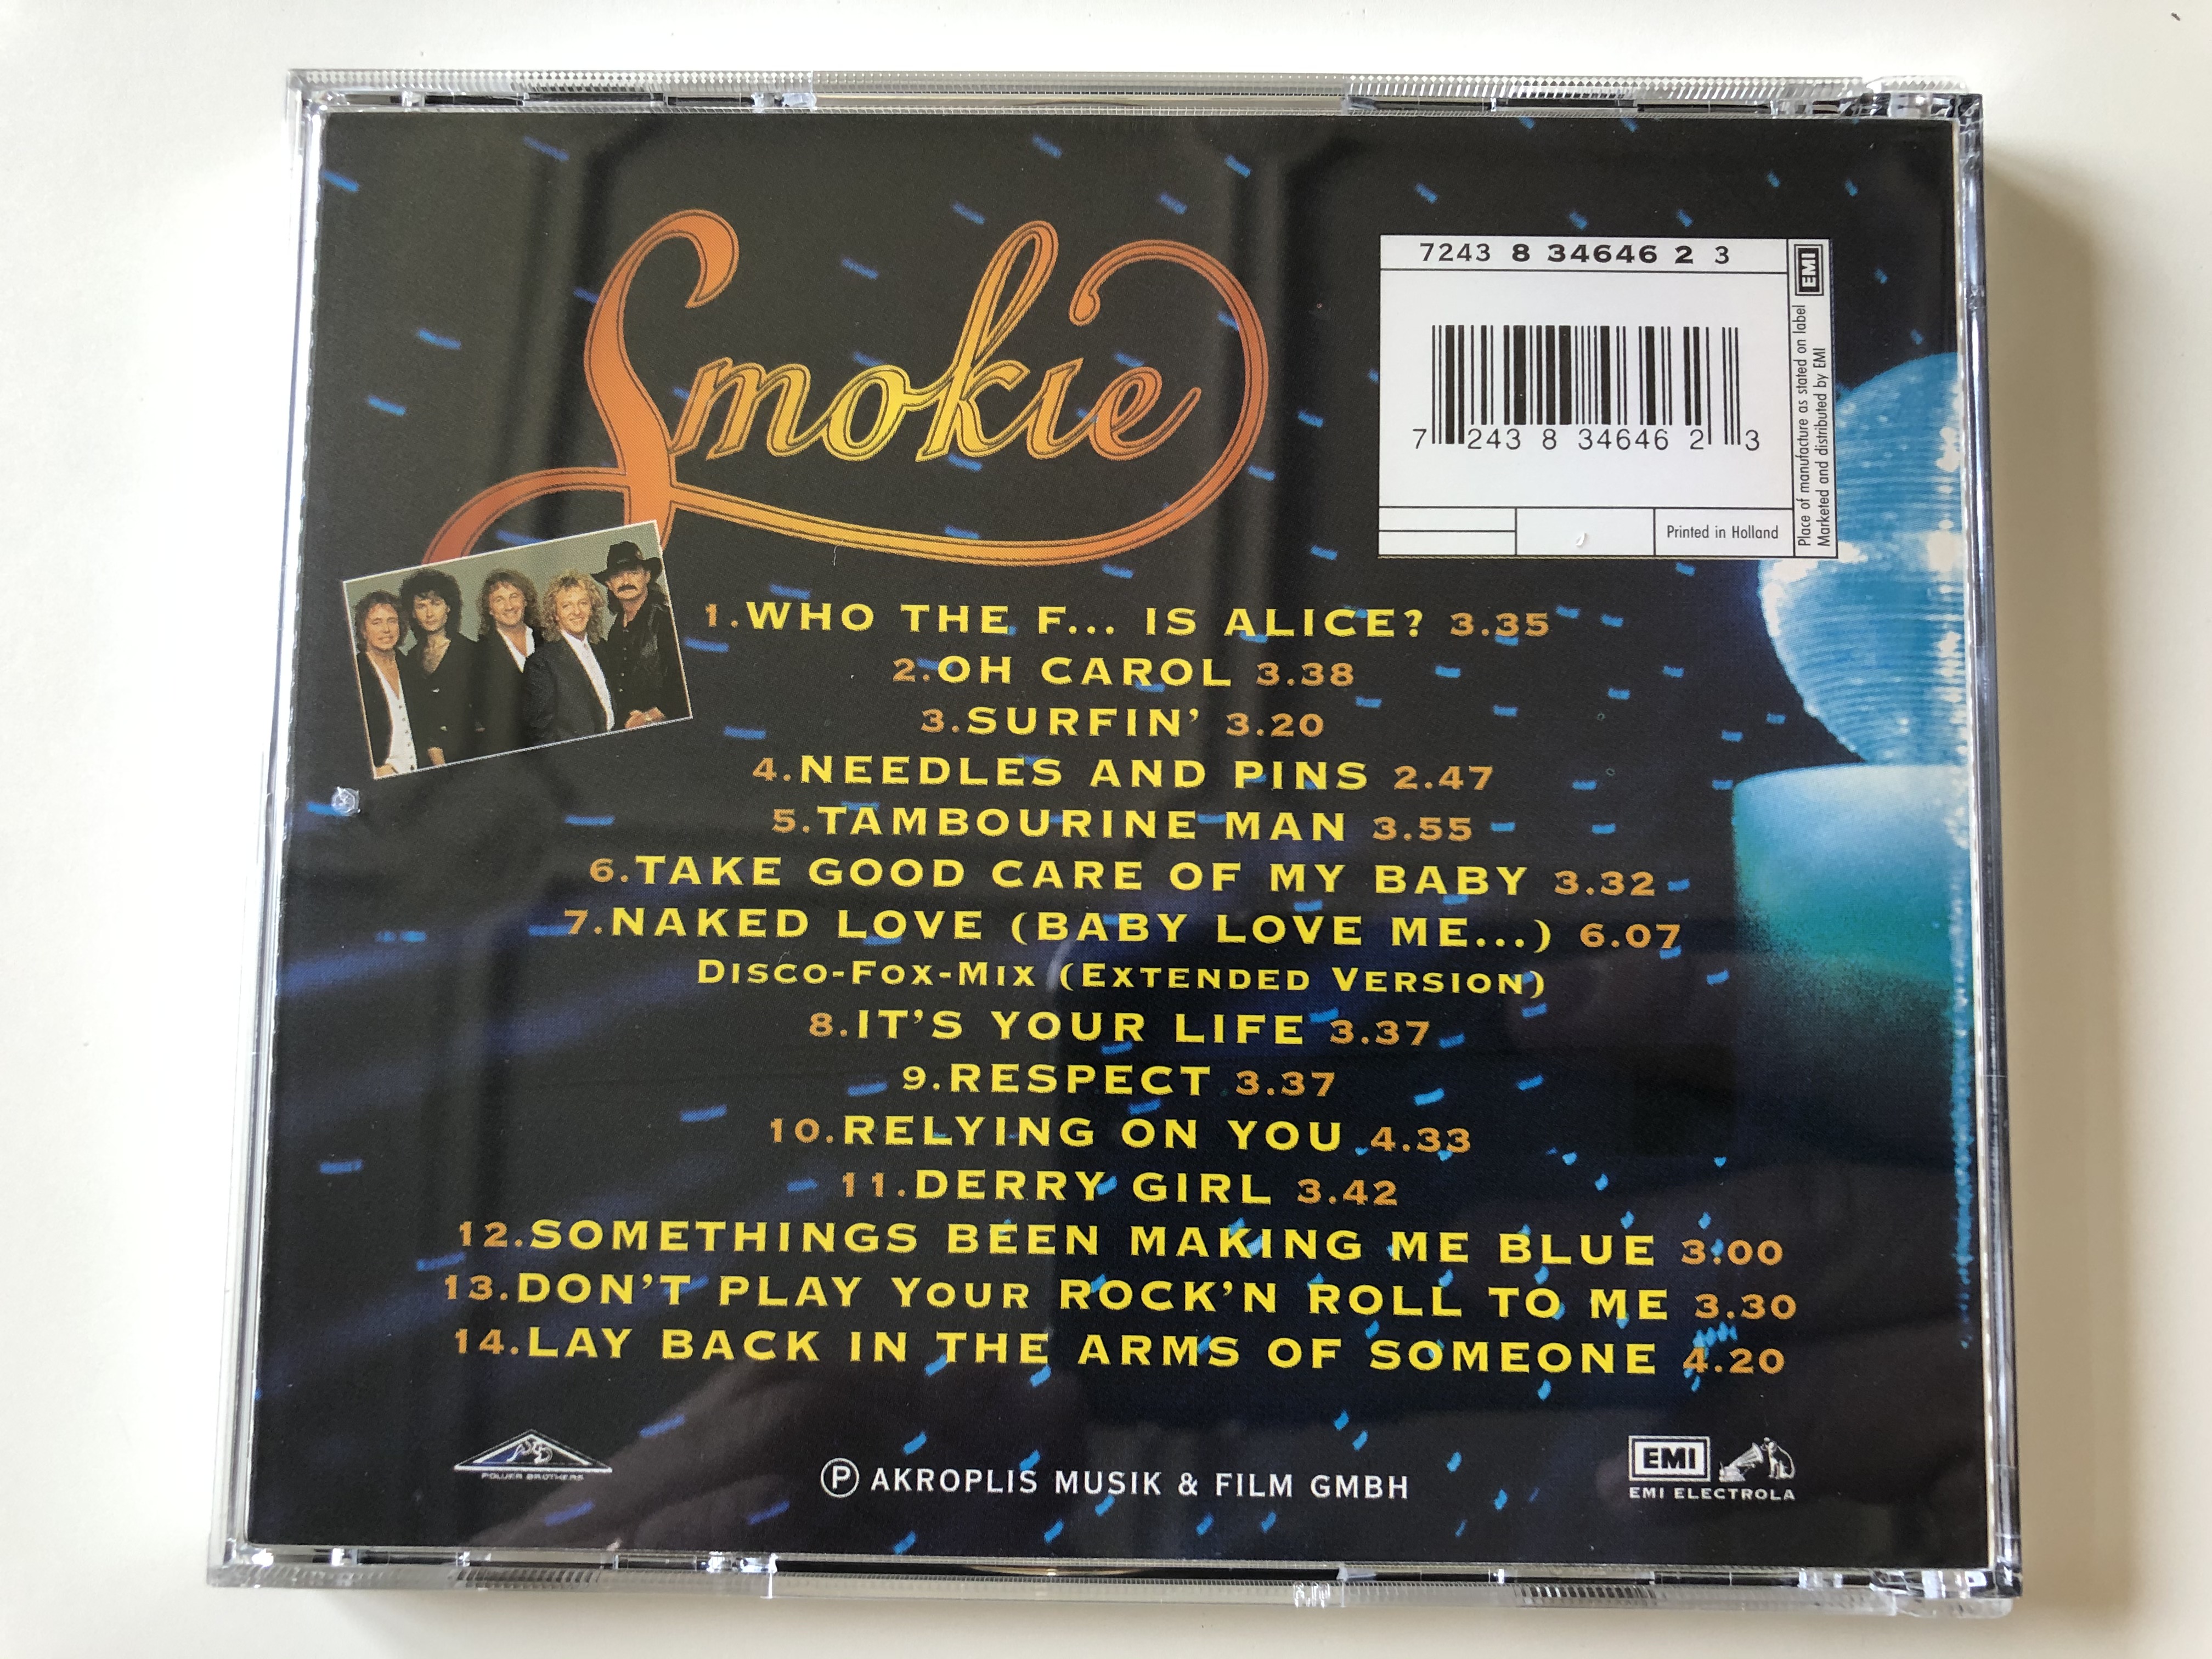 Who The F... Is Alice? - Smokie - The Party Hits / Incl. Who The F... Is  Alice, Surfin', Needles And Pins, Tambourine Man, Don't Play Your Rock'N  Roll To Me, Oh